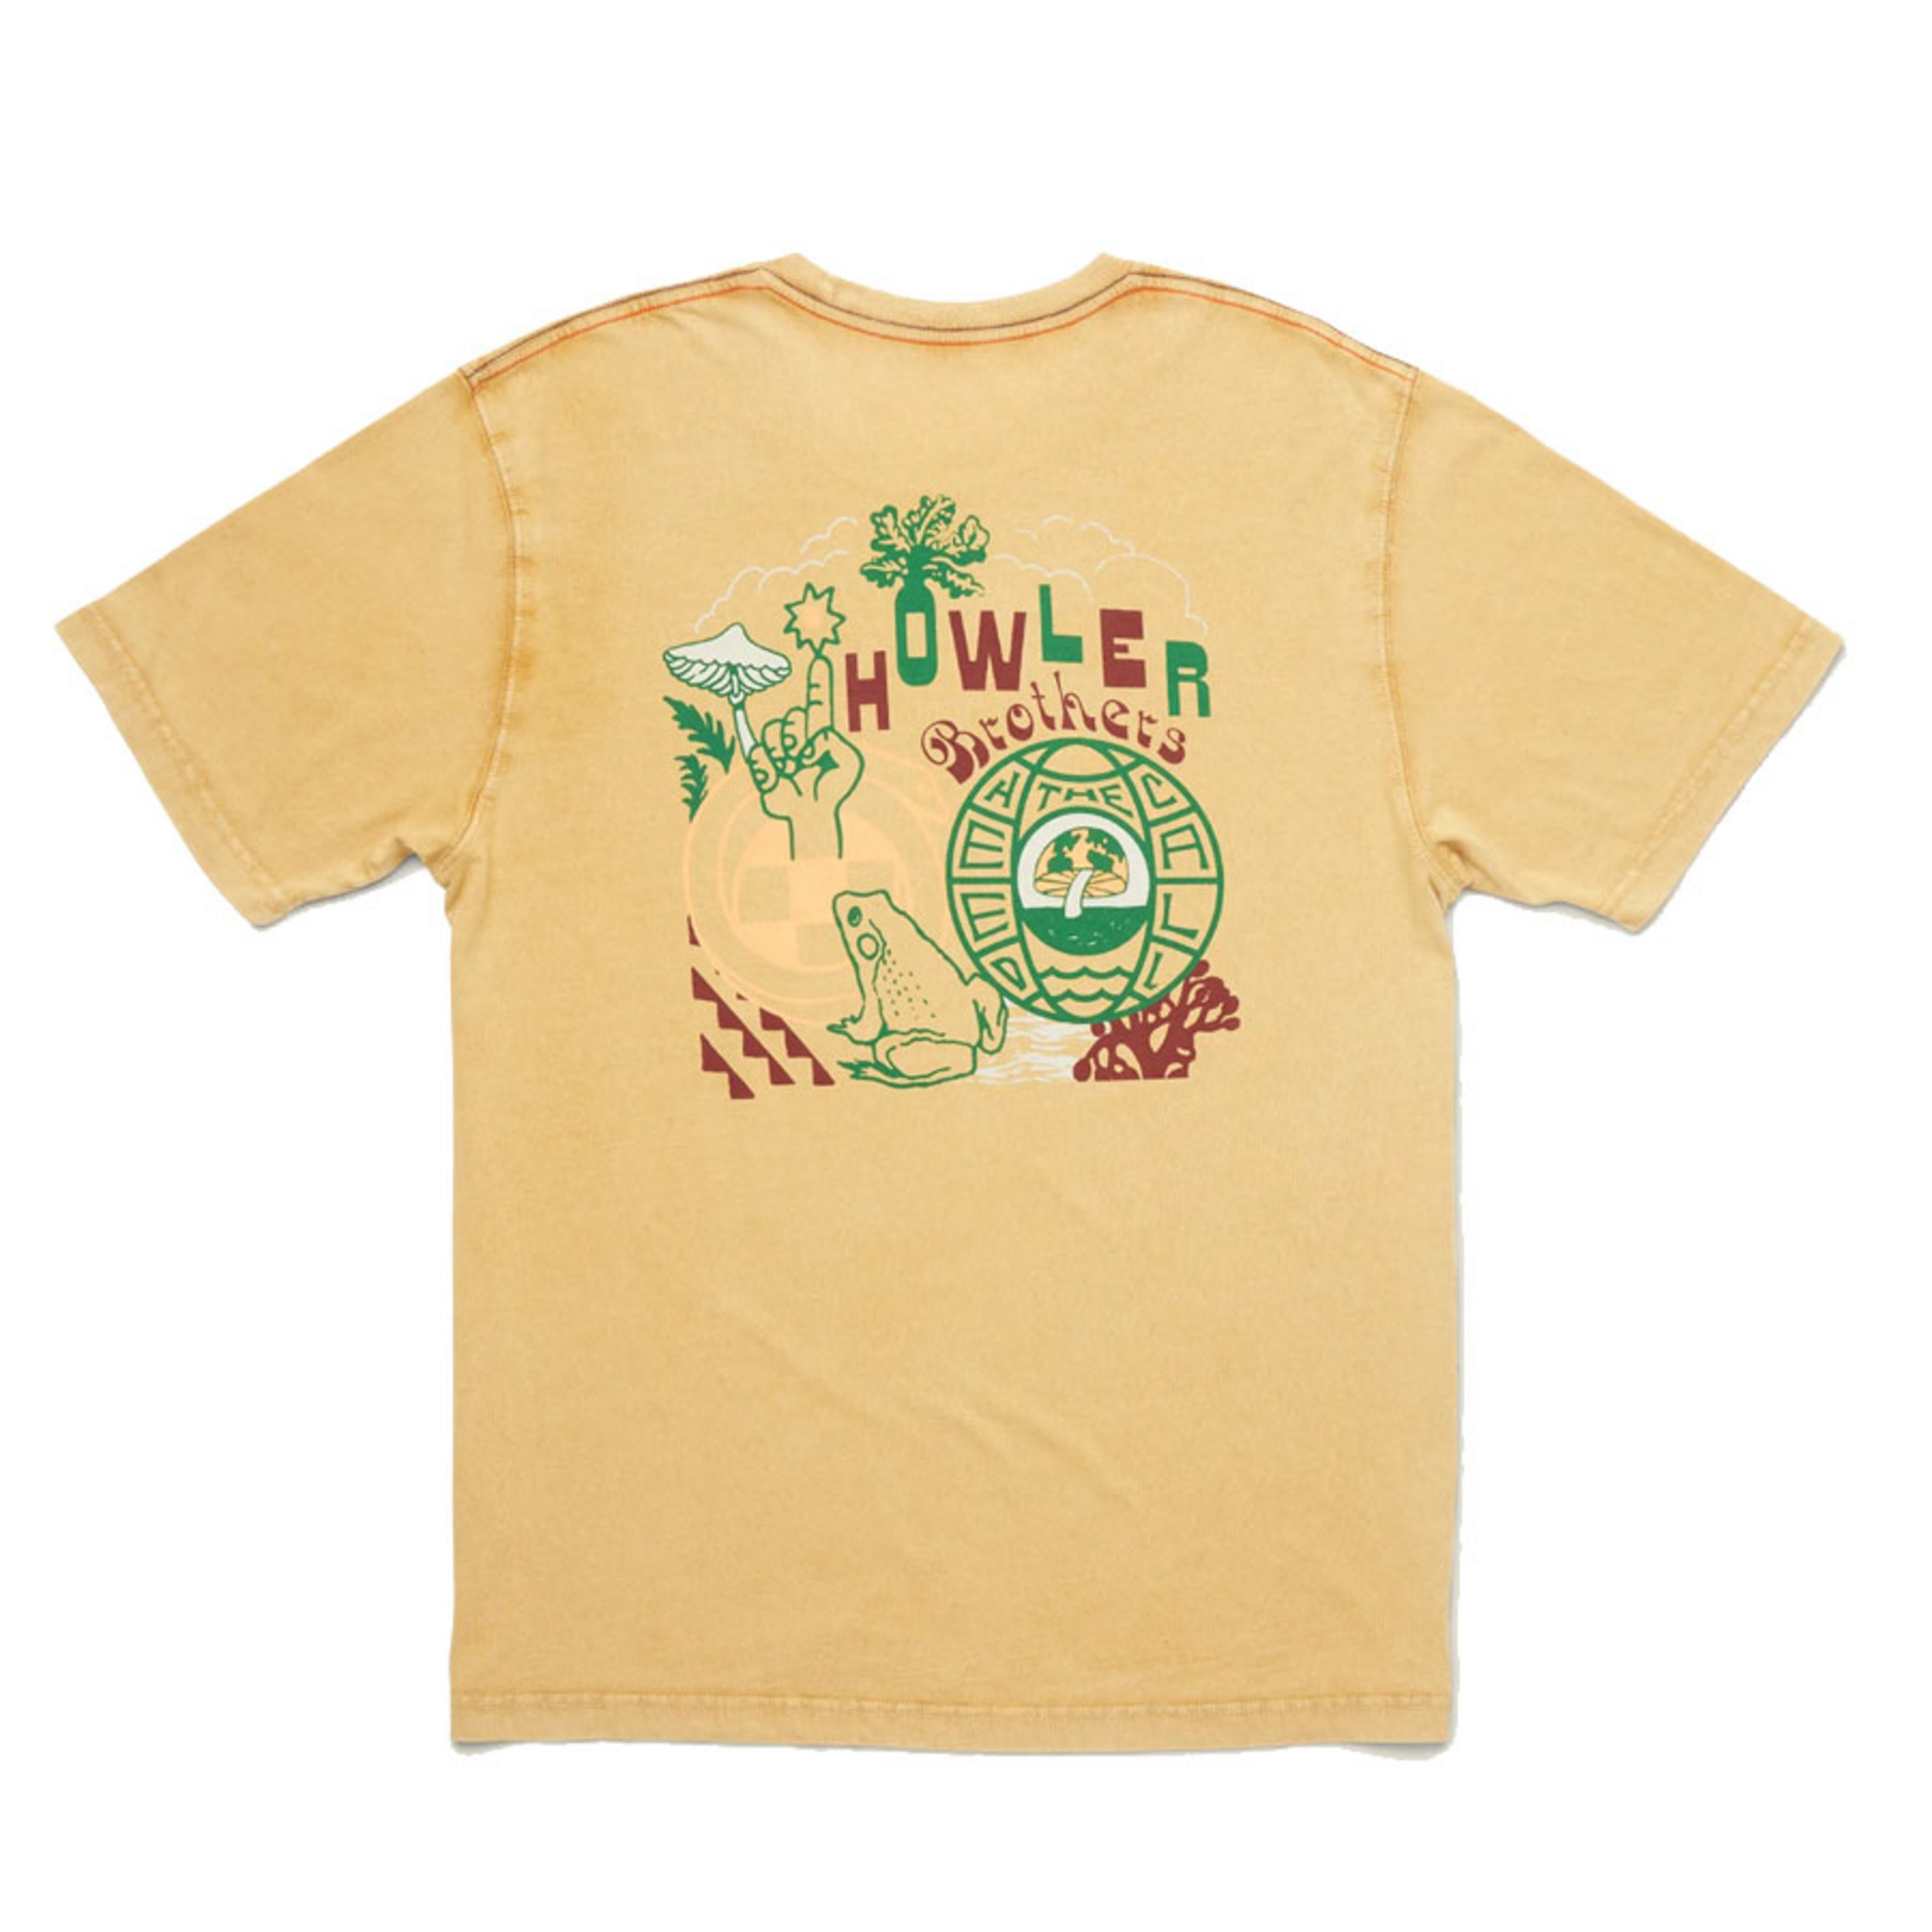 Howler Brothers Cotton s/s T-Shirt -Mens